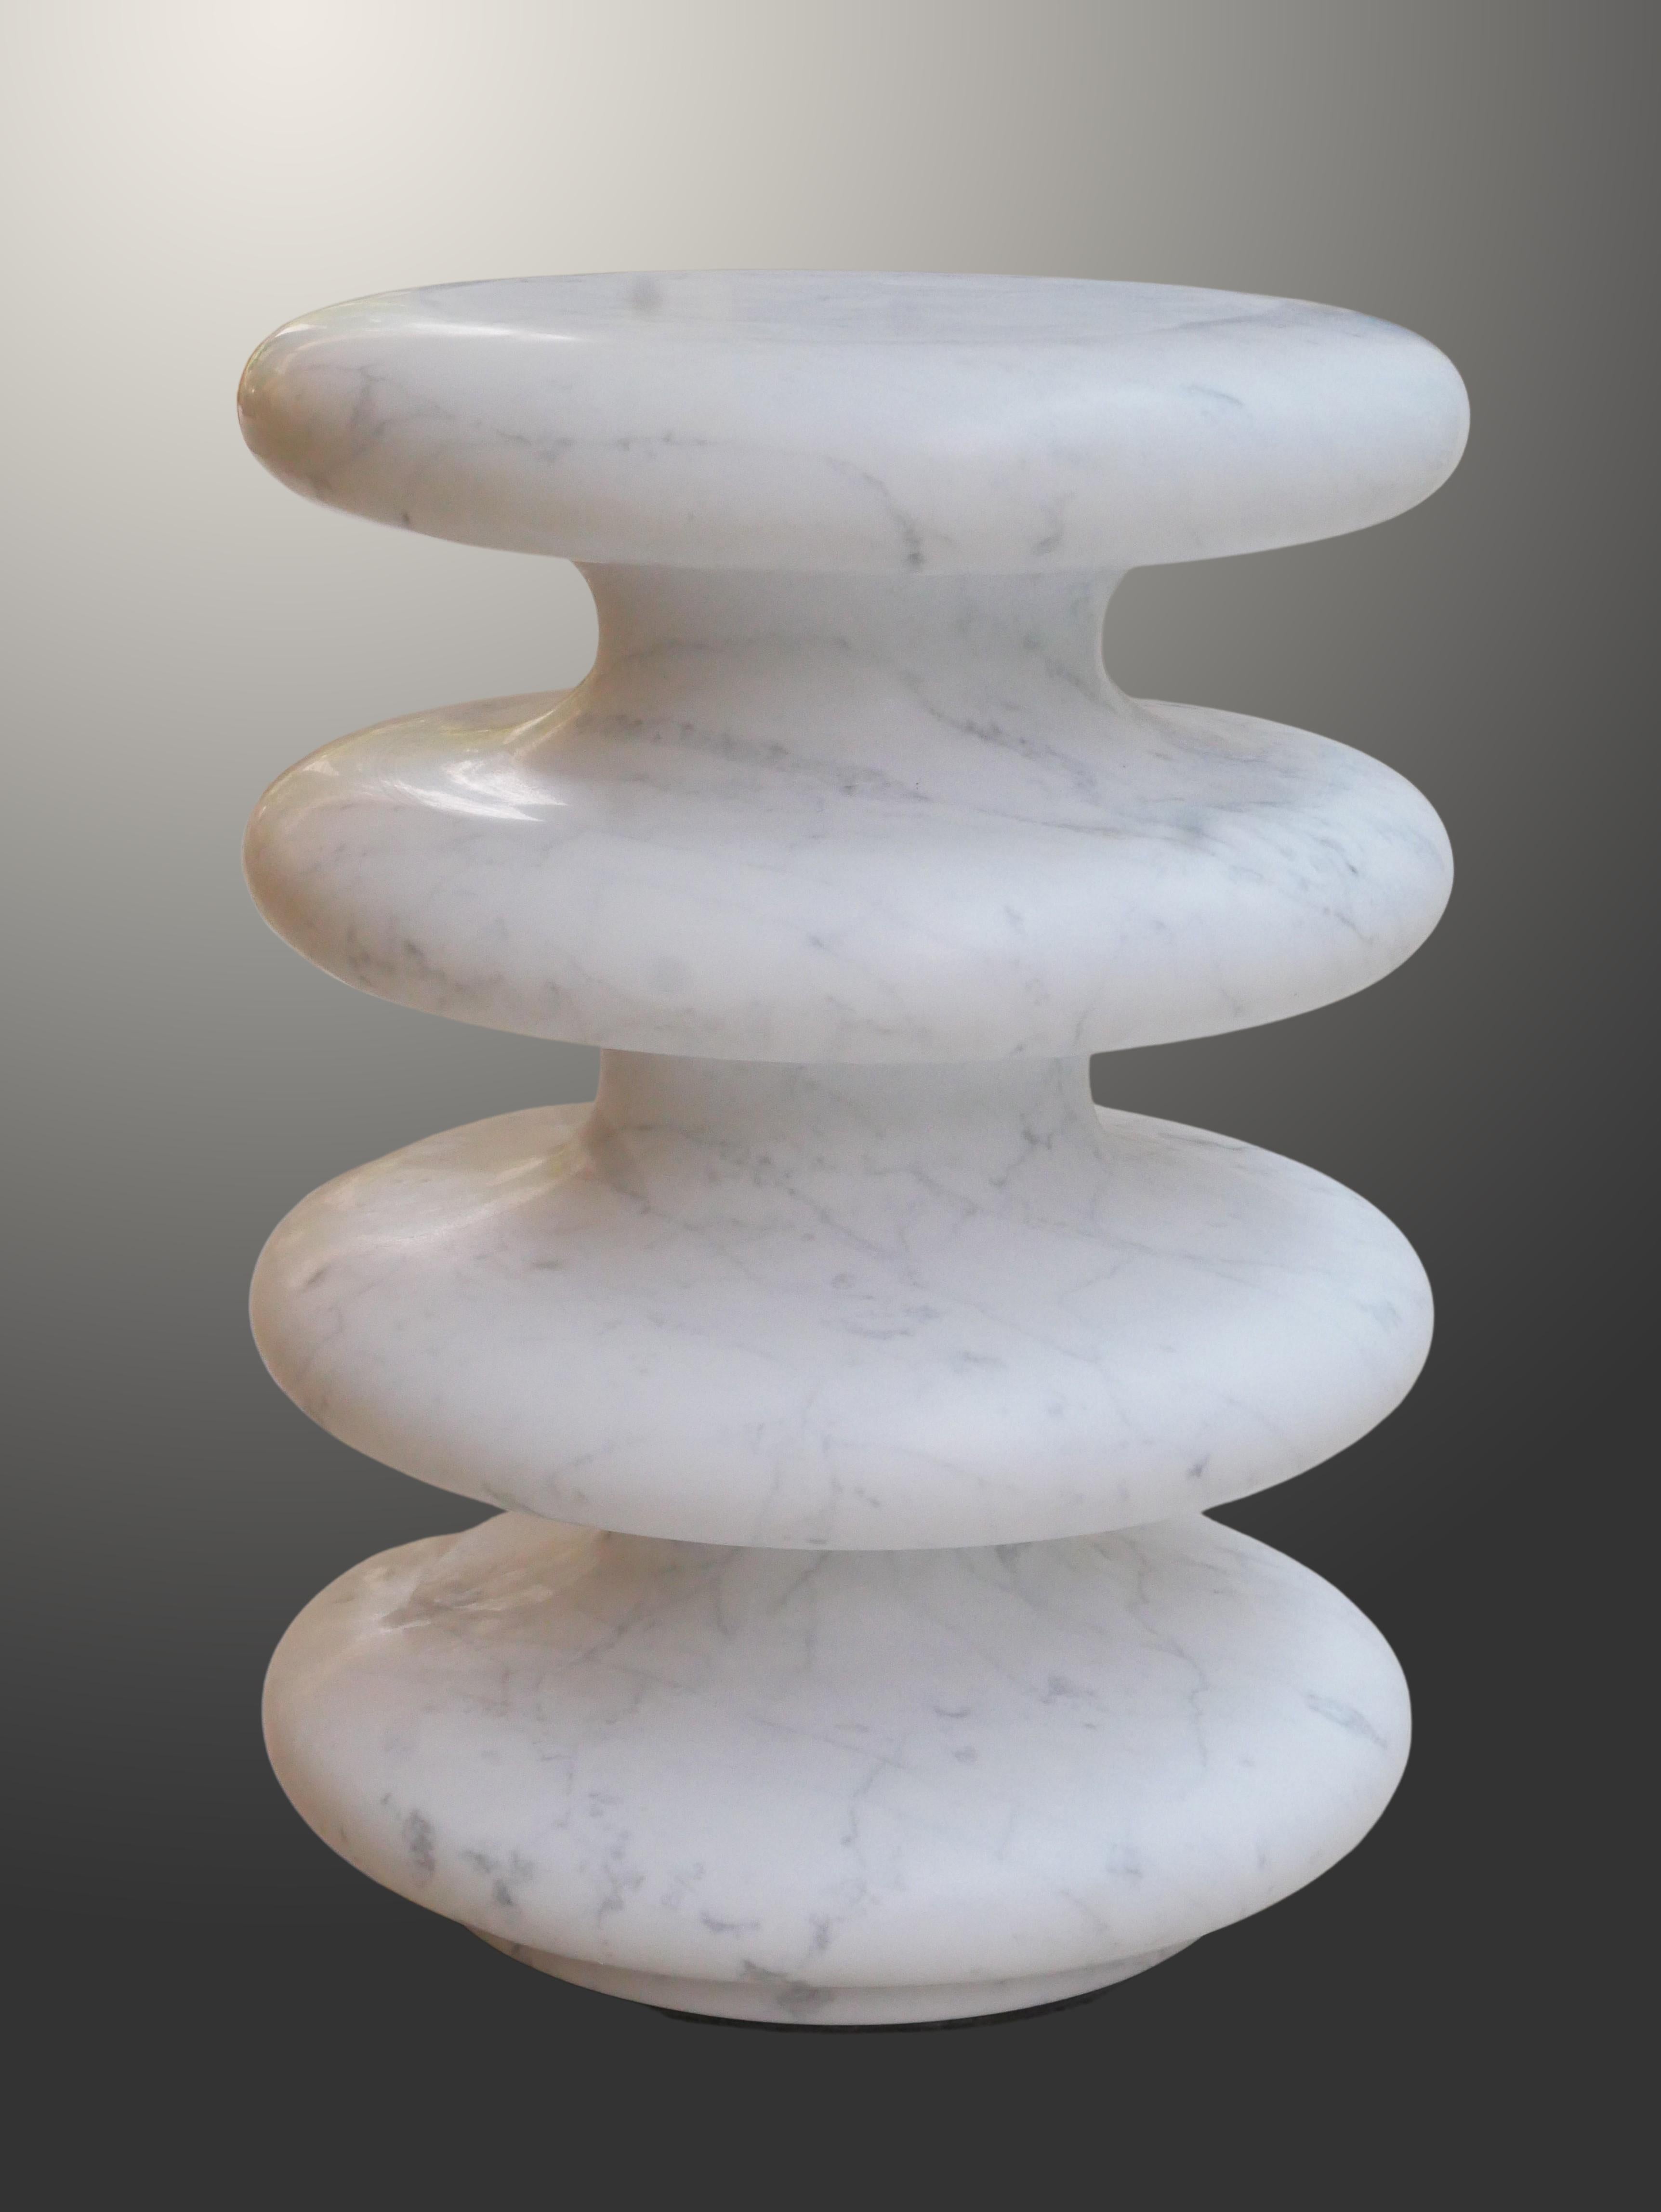 Stool or side table twist made by designer Patrick LAROCHE, Meilleur Ouvrier de France, in Carrara marble hand polished finish. The piece is smooth and elegant. 
Made in France, signed.
Limited edition
Known for his sculptural work, Patrick Laroche